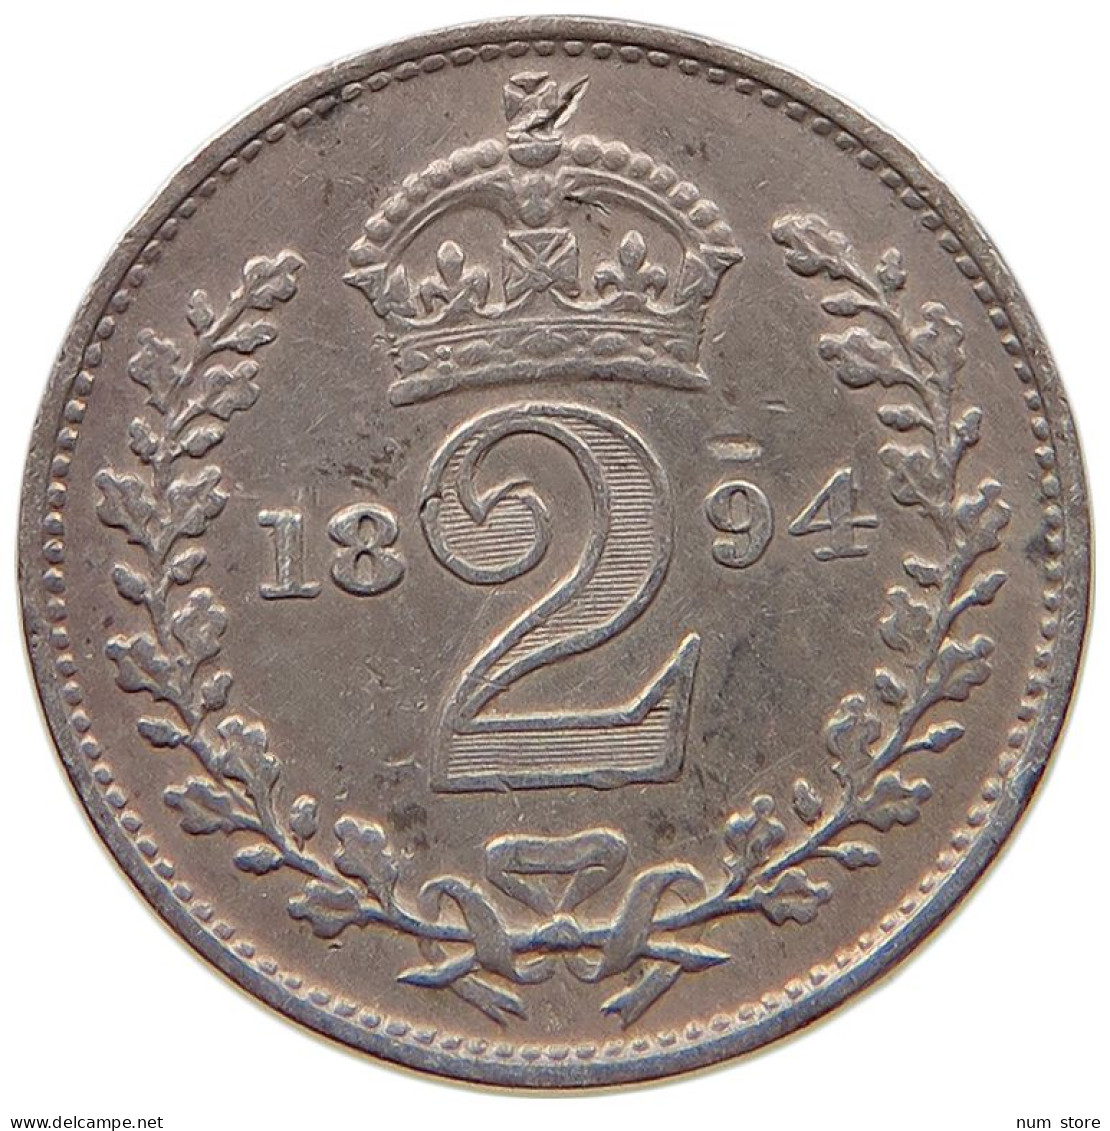 GREAT BRITAIN TWO PENCE 1894 Victoria 1837-1901 MAUNDY #t082 0085 - E. 1 1/2 - 2 Pence